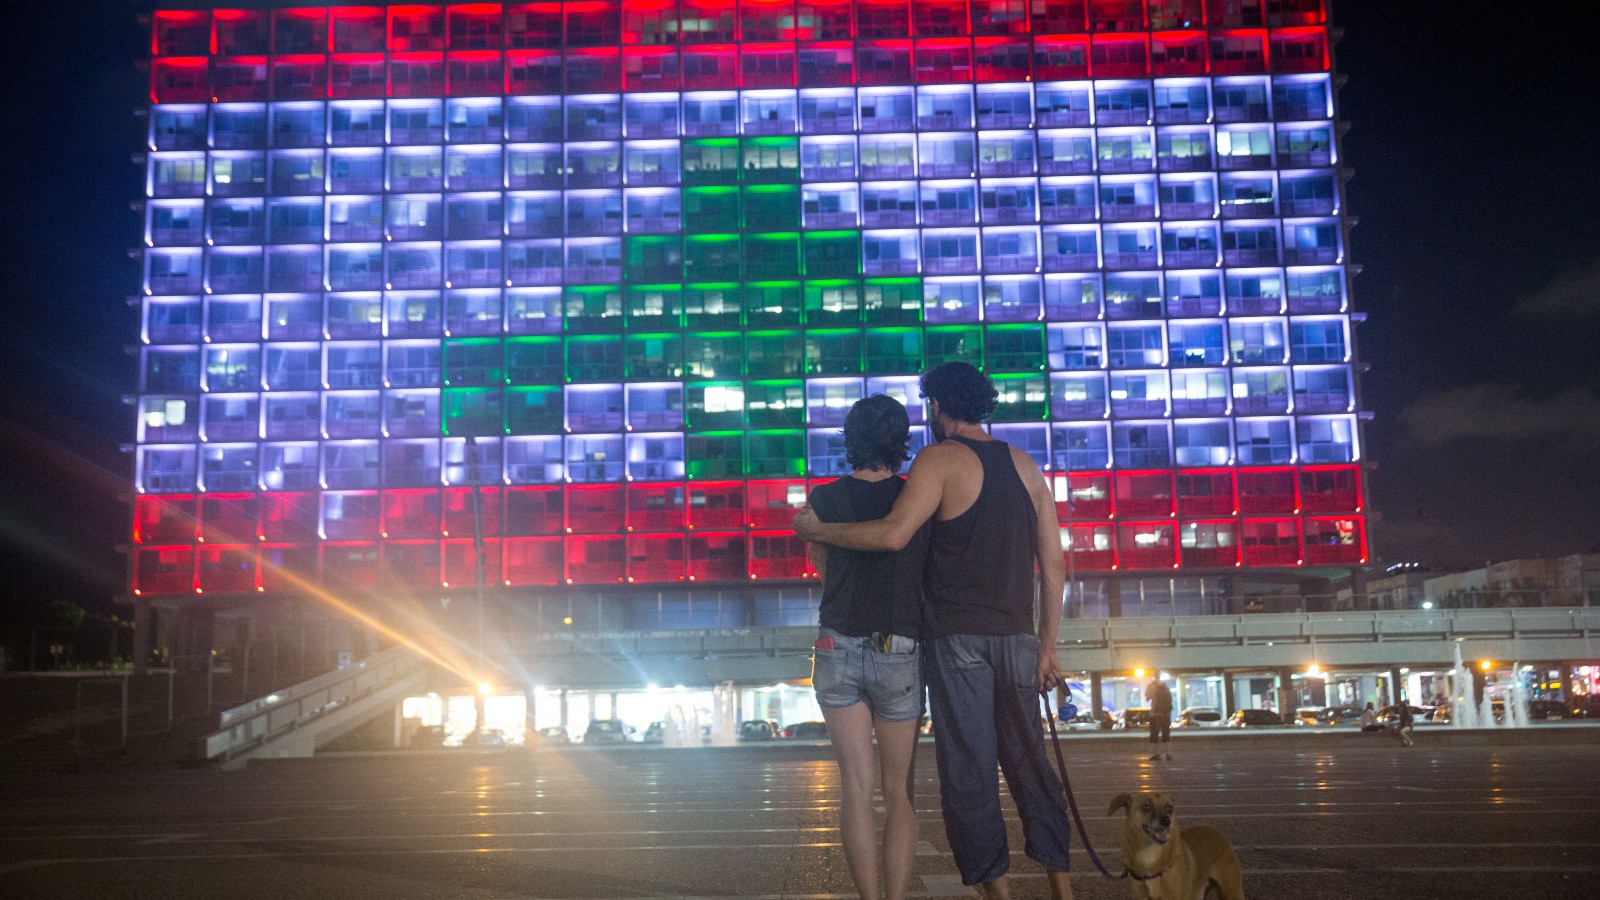 The Tel Aviv-Yafo municipality building on Rabin Square was lit up on August 5, 2020, with the Lebanese flag in solidarity with the victims of the Beirut explosion. Photo by Miriam Alster/FLASH90